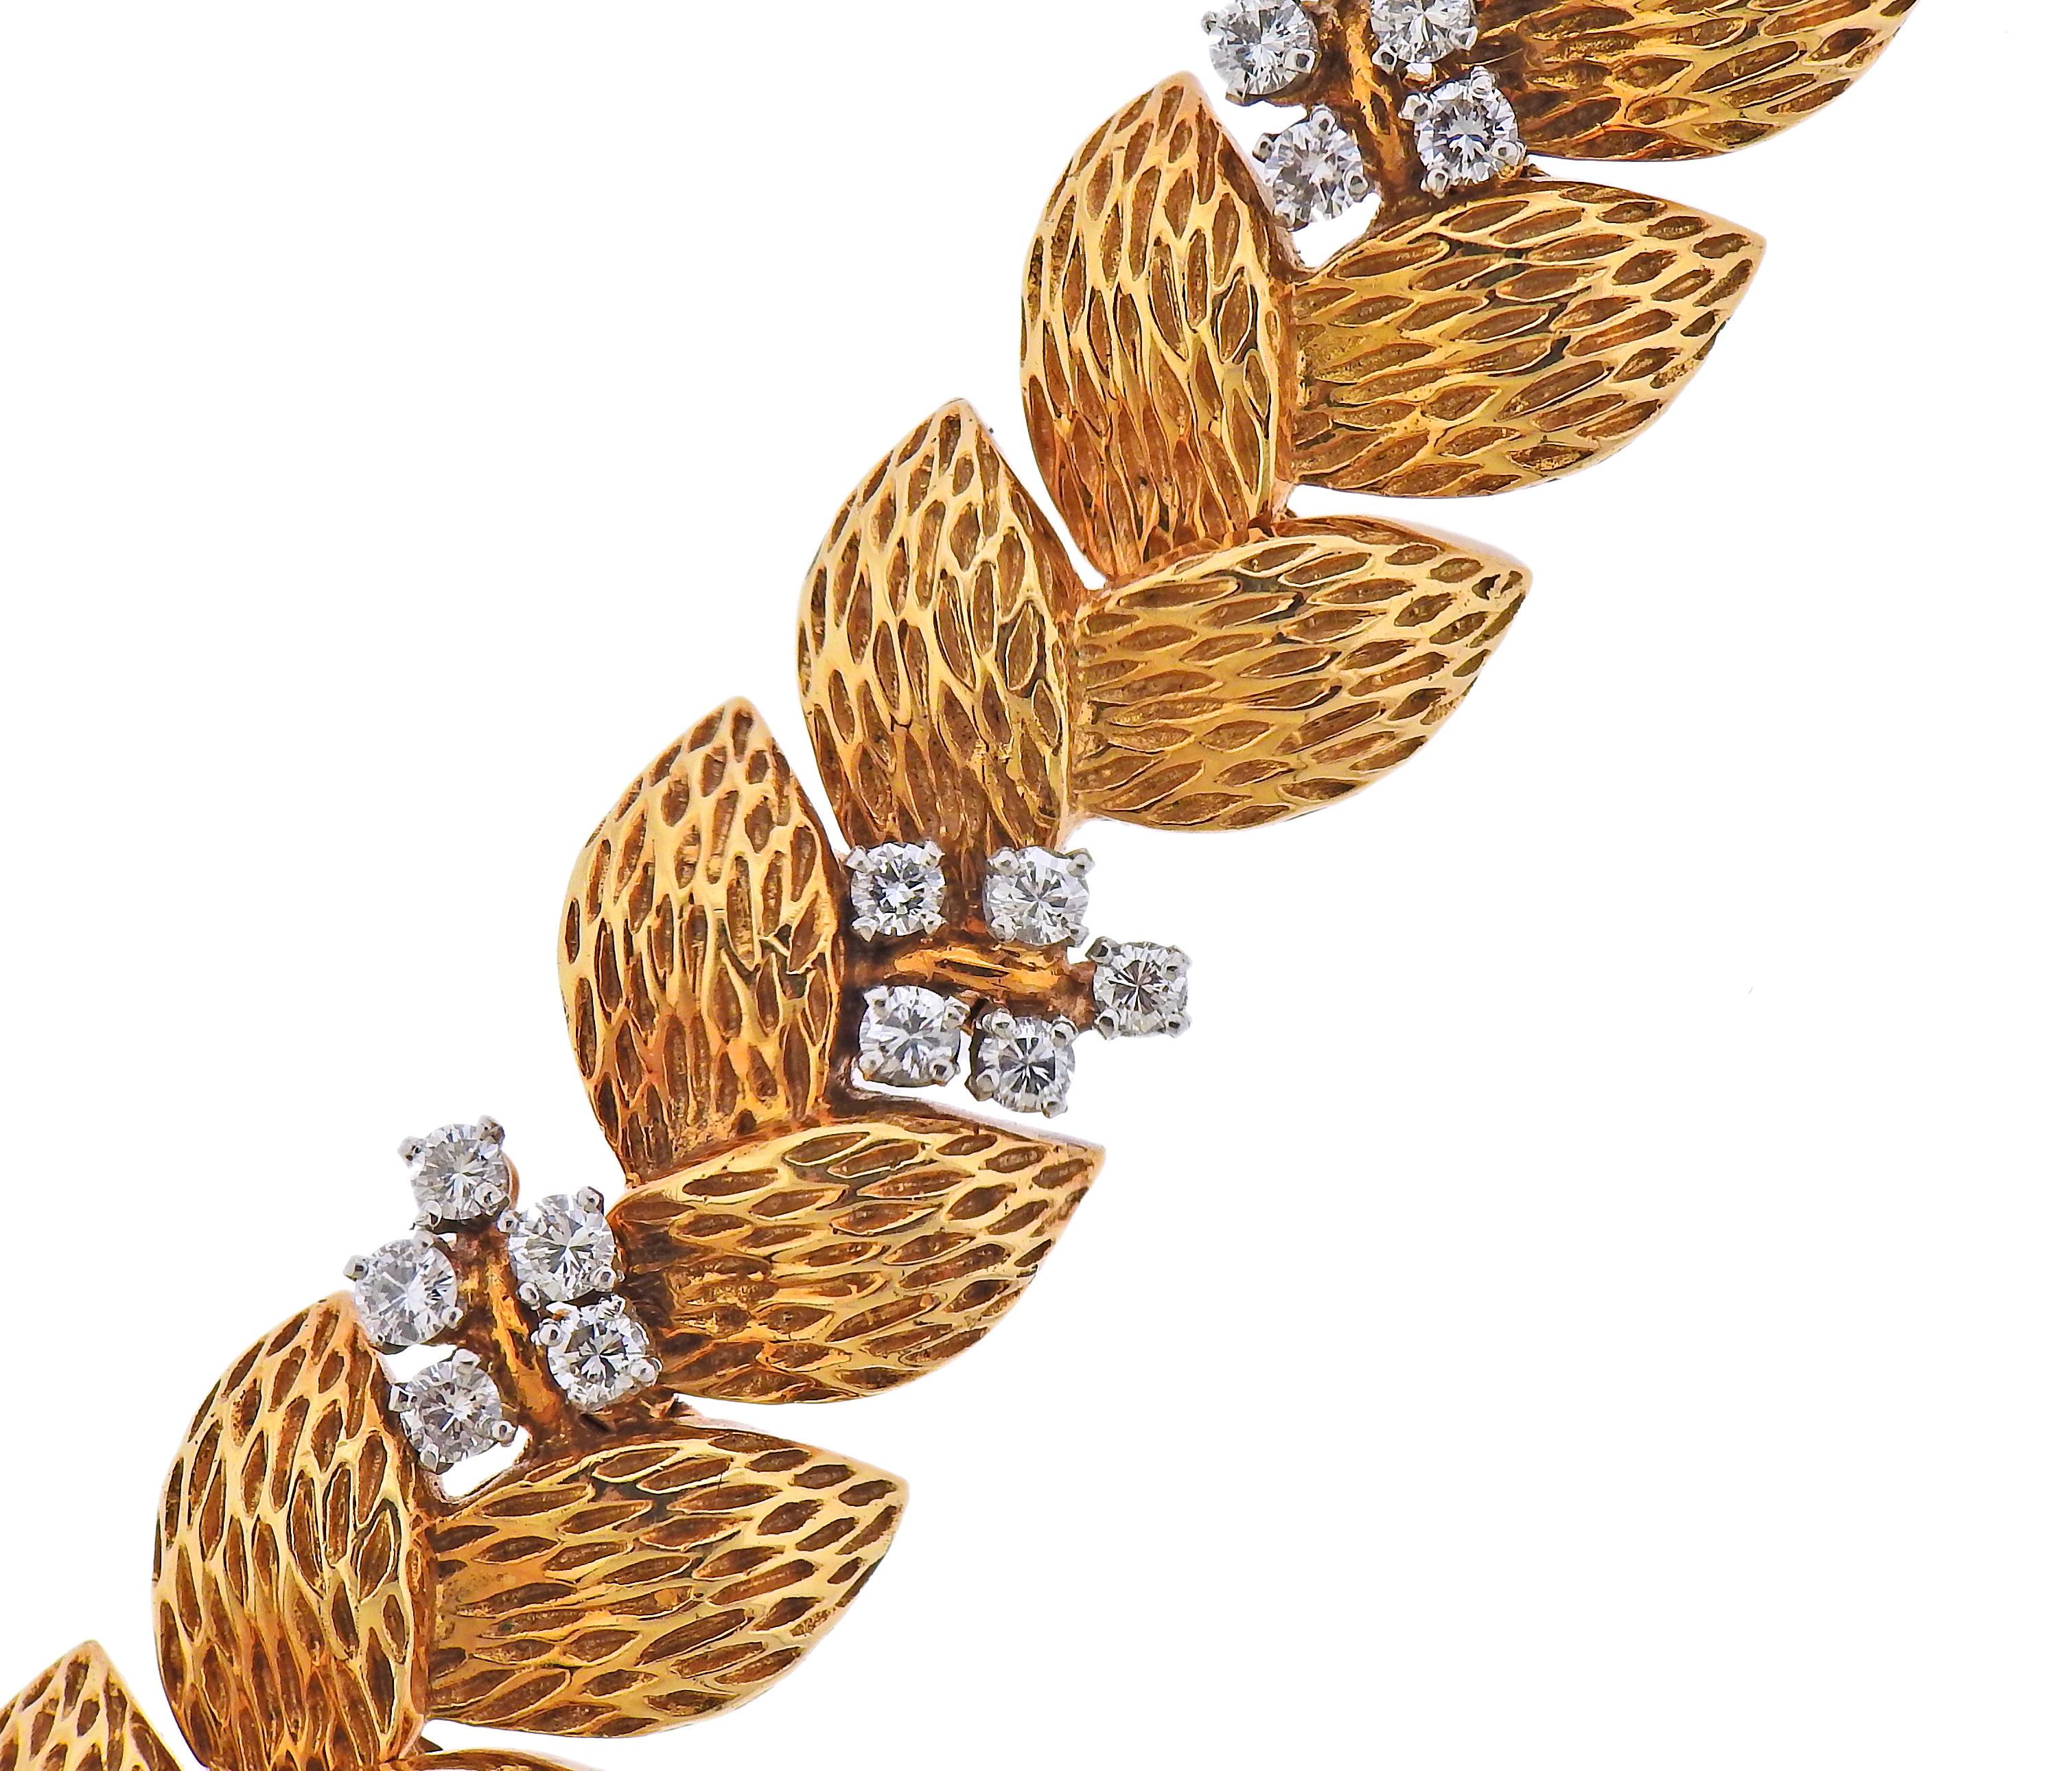 1960s Cartier Paris bracelet, crafted in 18k yellow gold with approx. 2.50cts in diamonds. Bracelet is 7